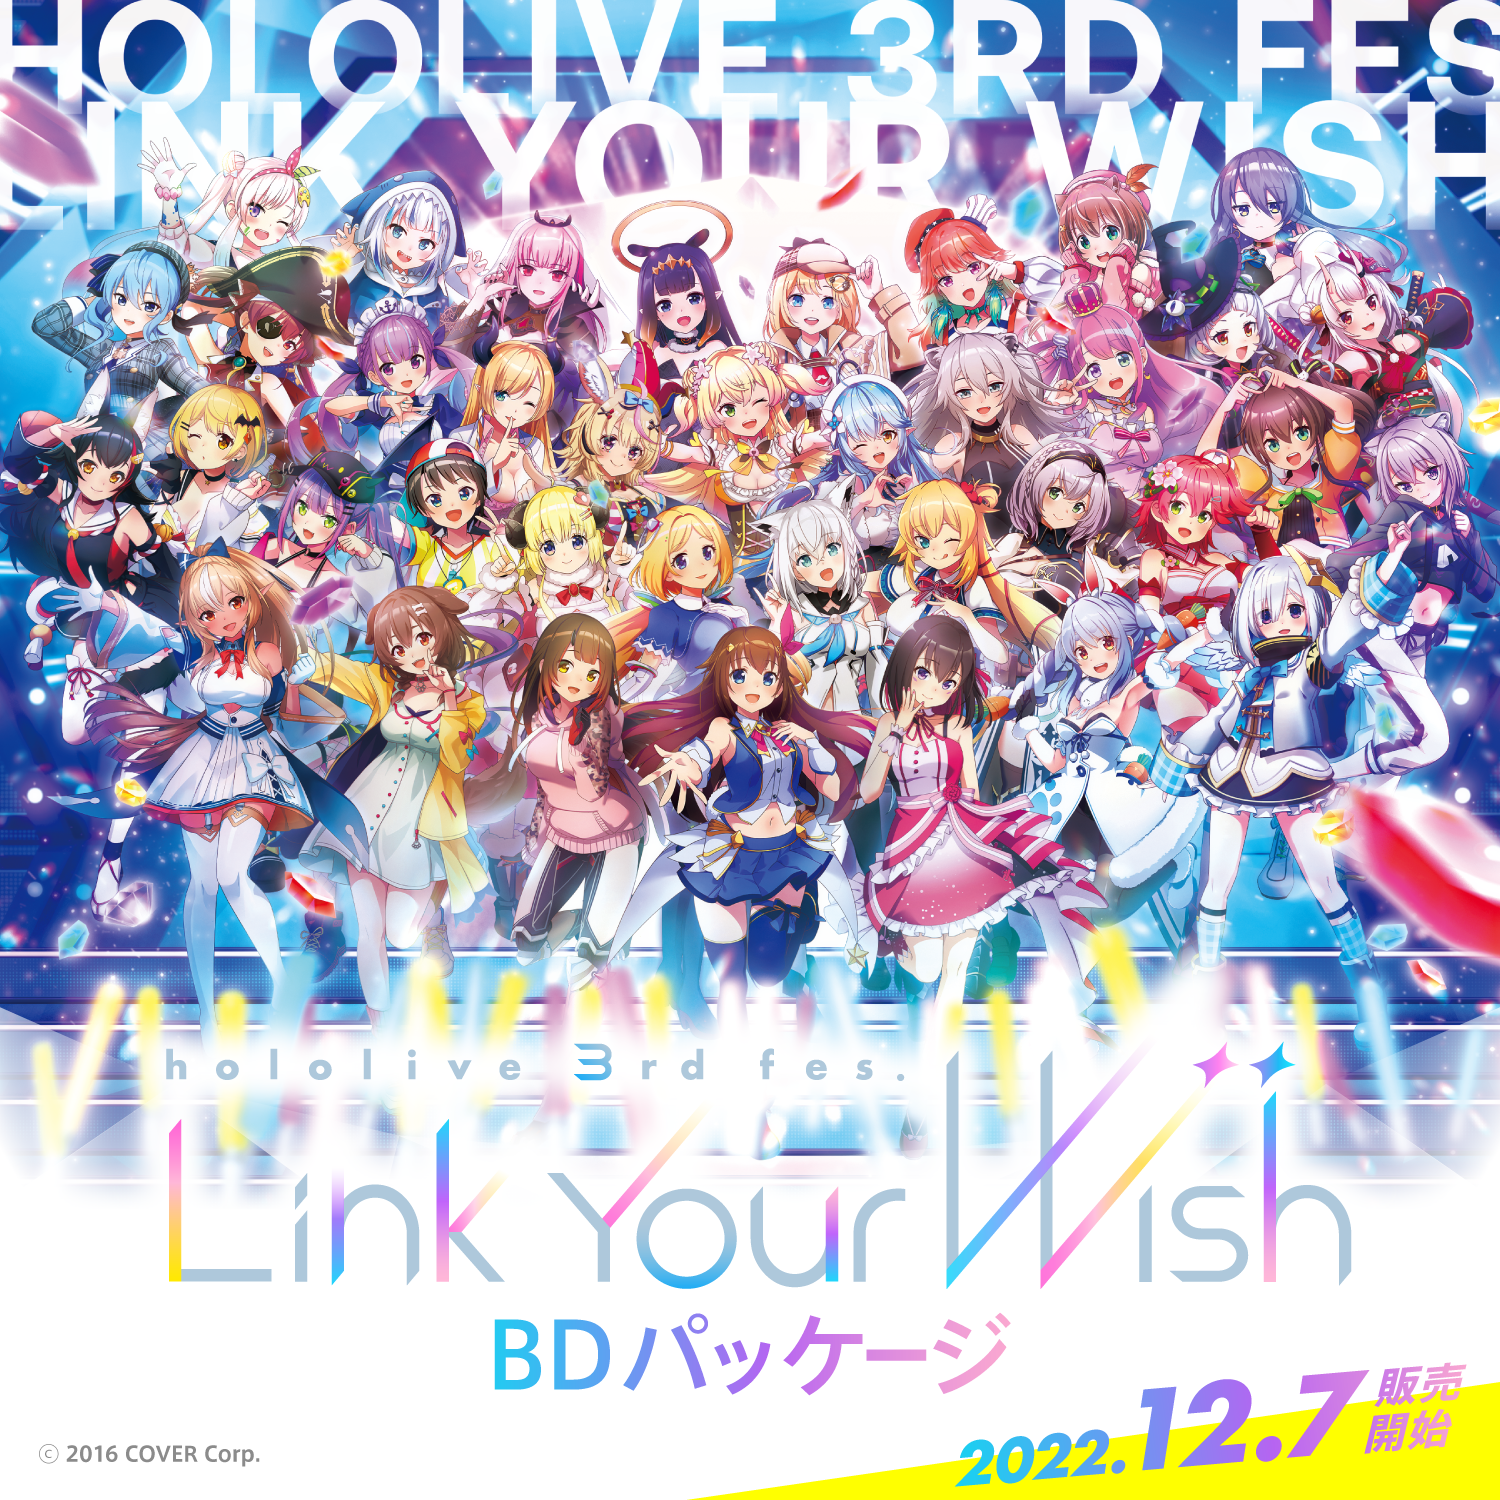 hololive 3rd fes. Link Your Wish』Blu-ray – hololive production ...